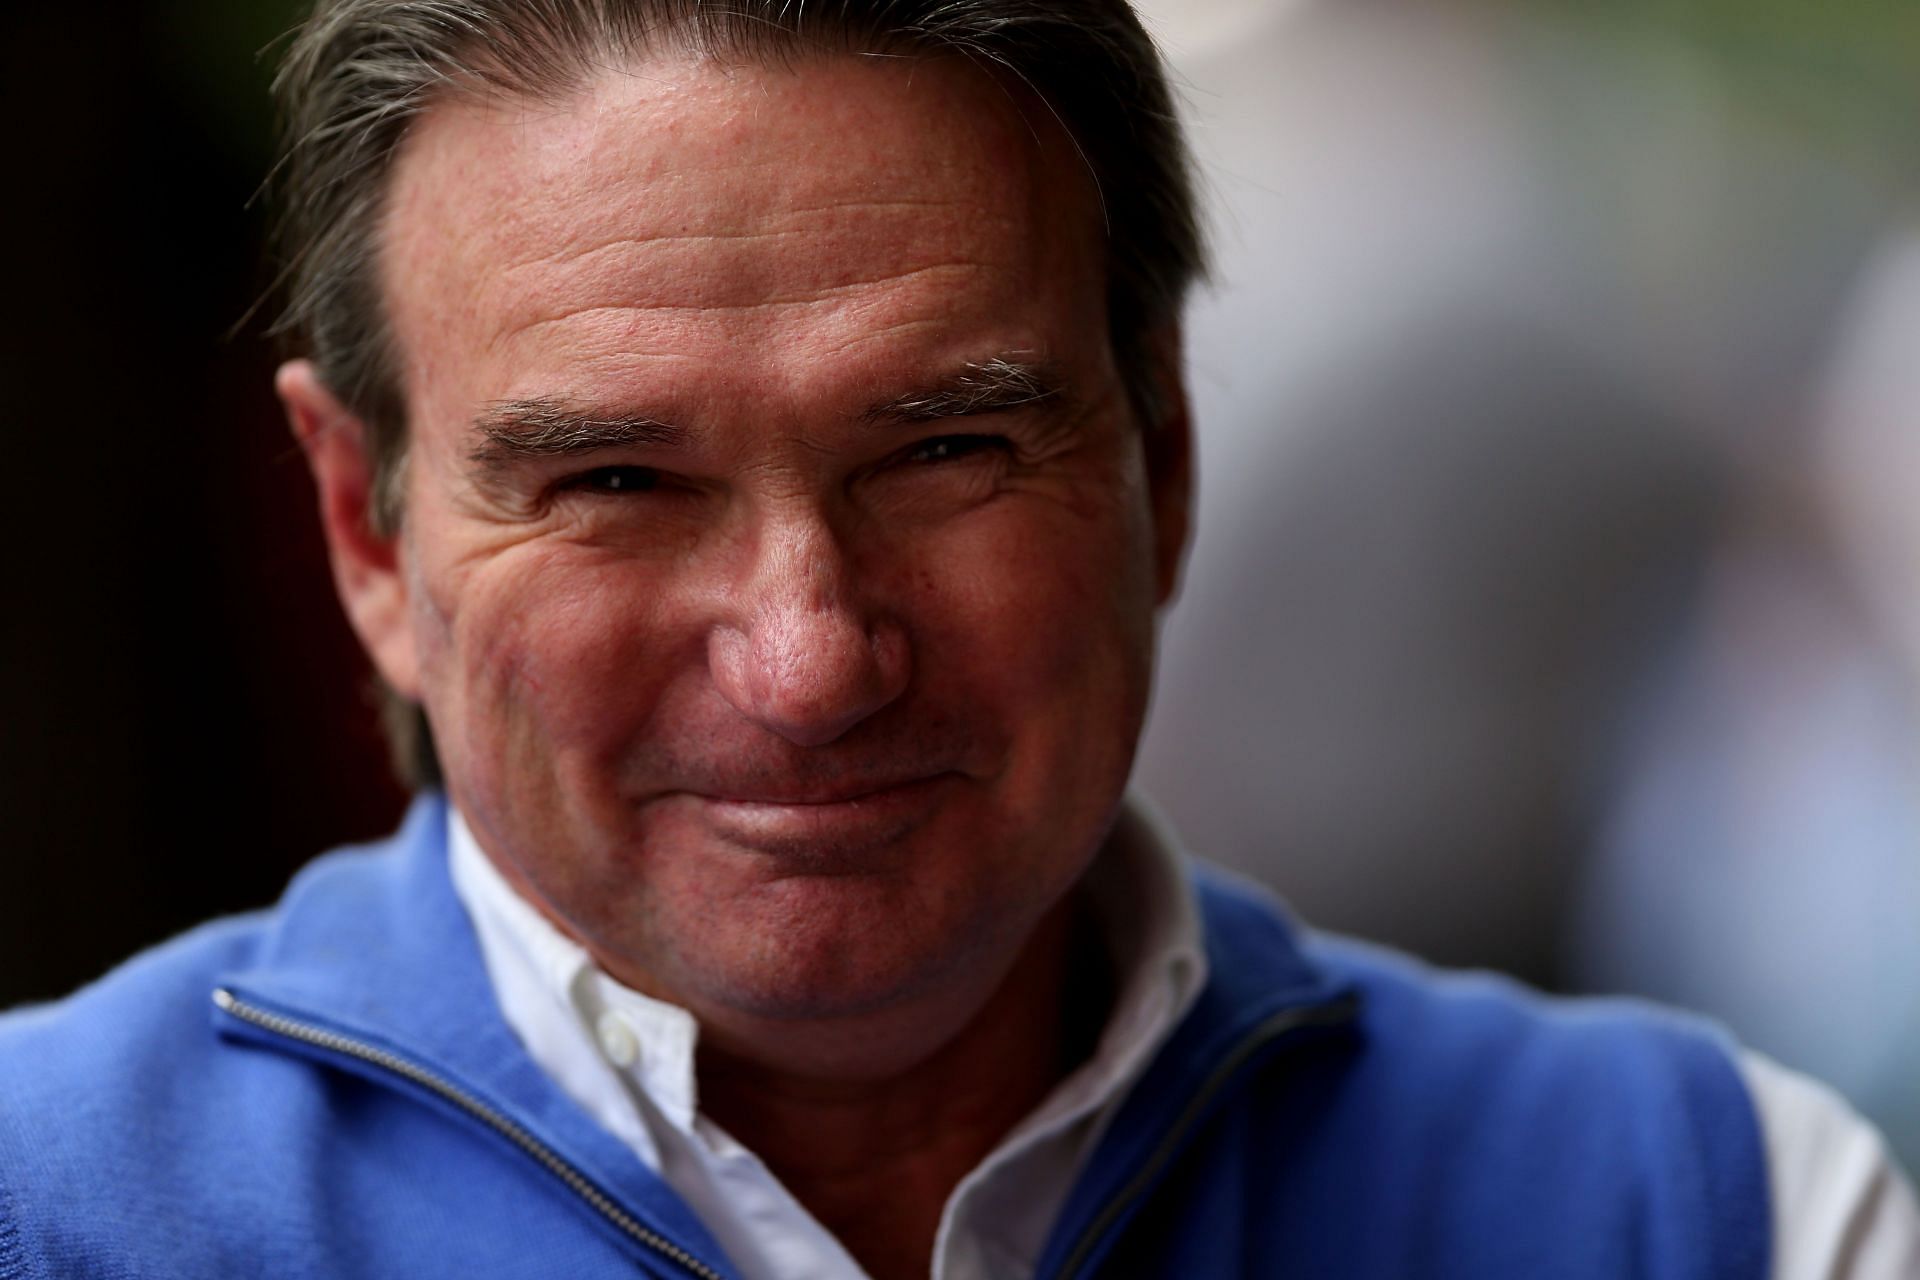 Jimmy Connors pictured at the 2012 US Open